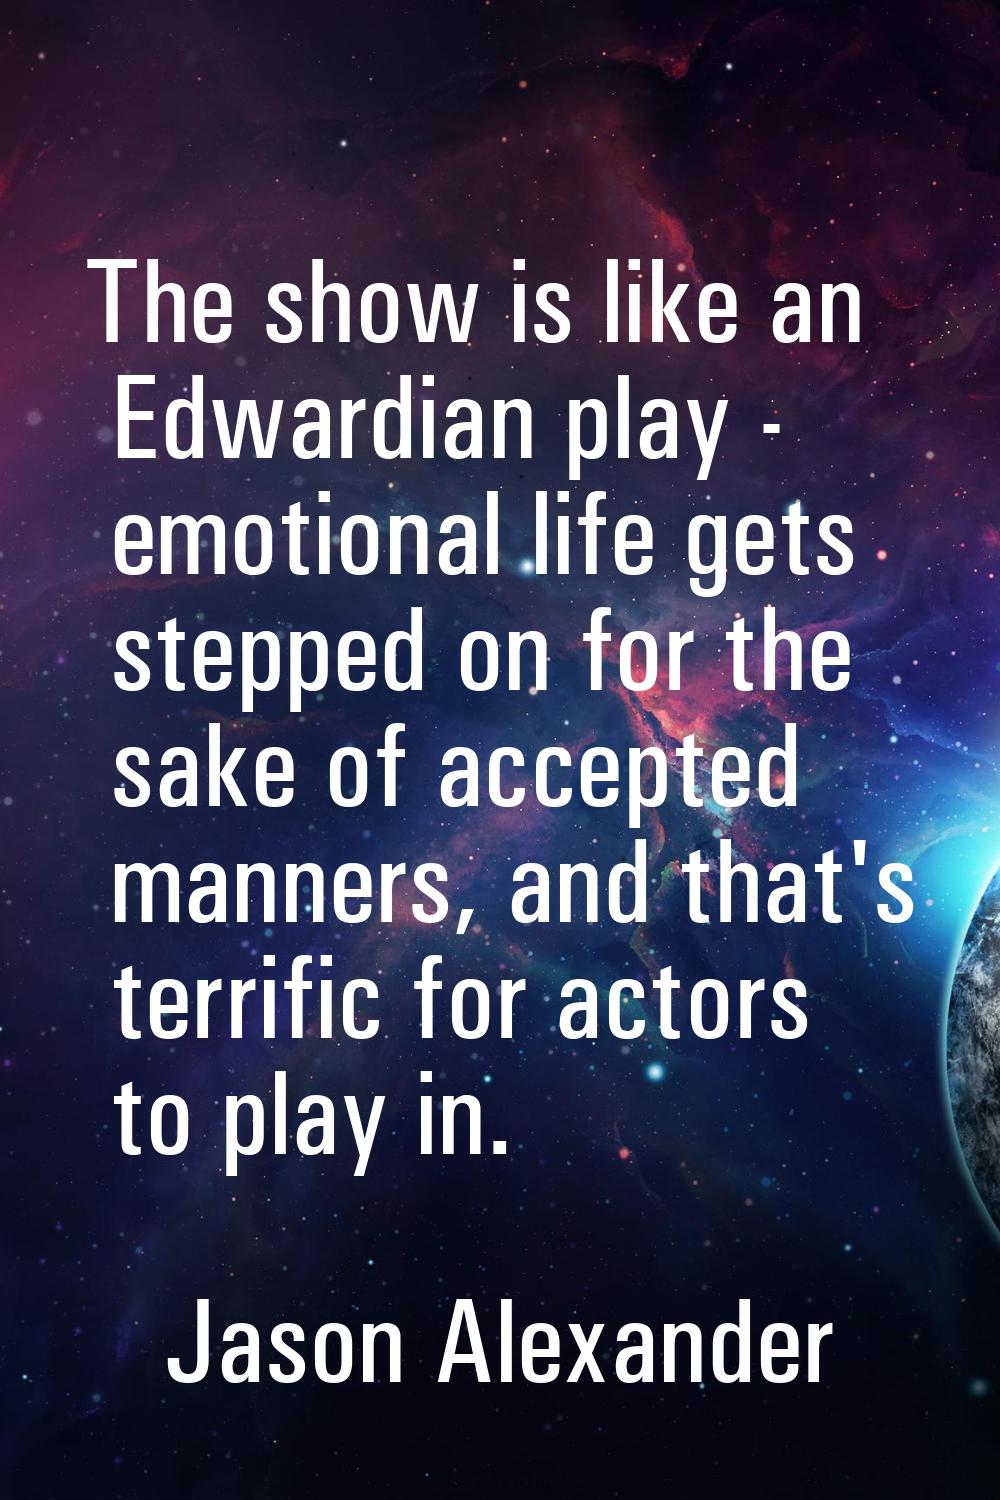 The show is like an Edwardian play - emotional life gets stepped on for the sake of accepted manner